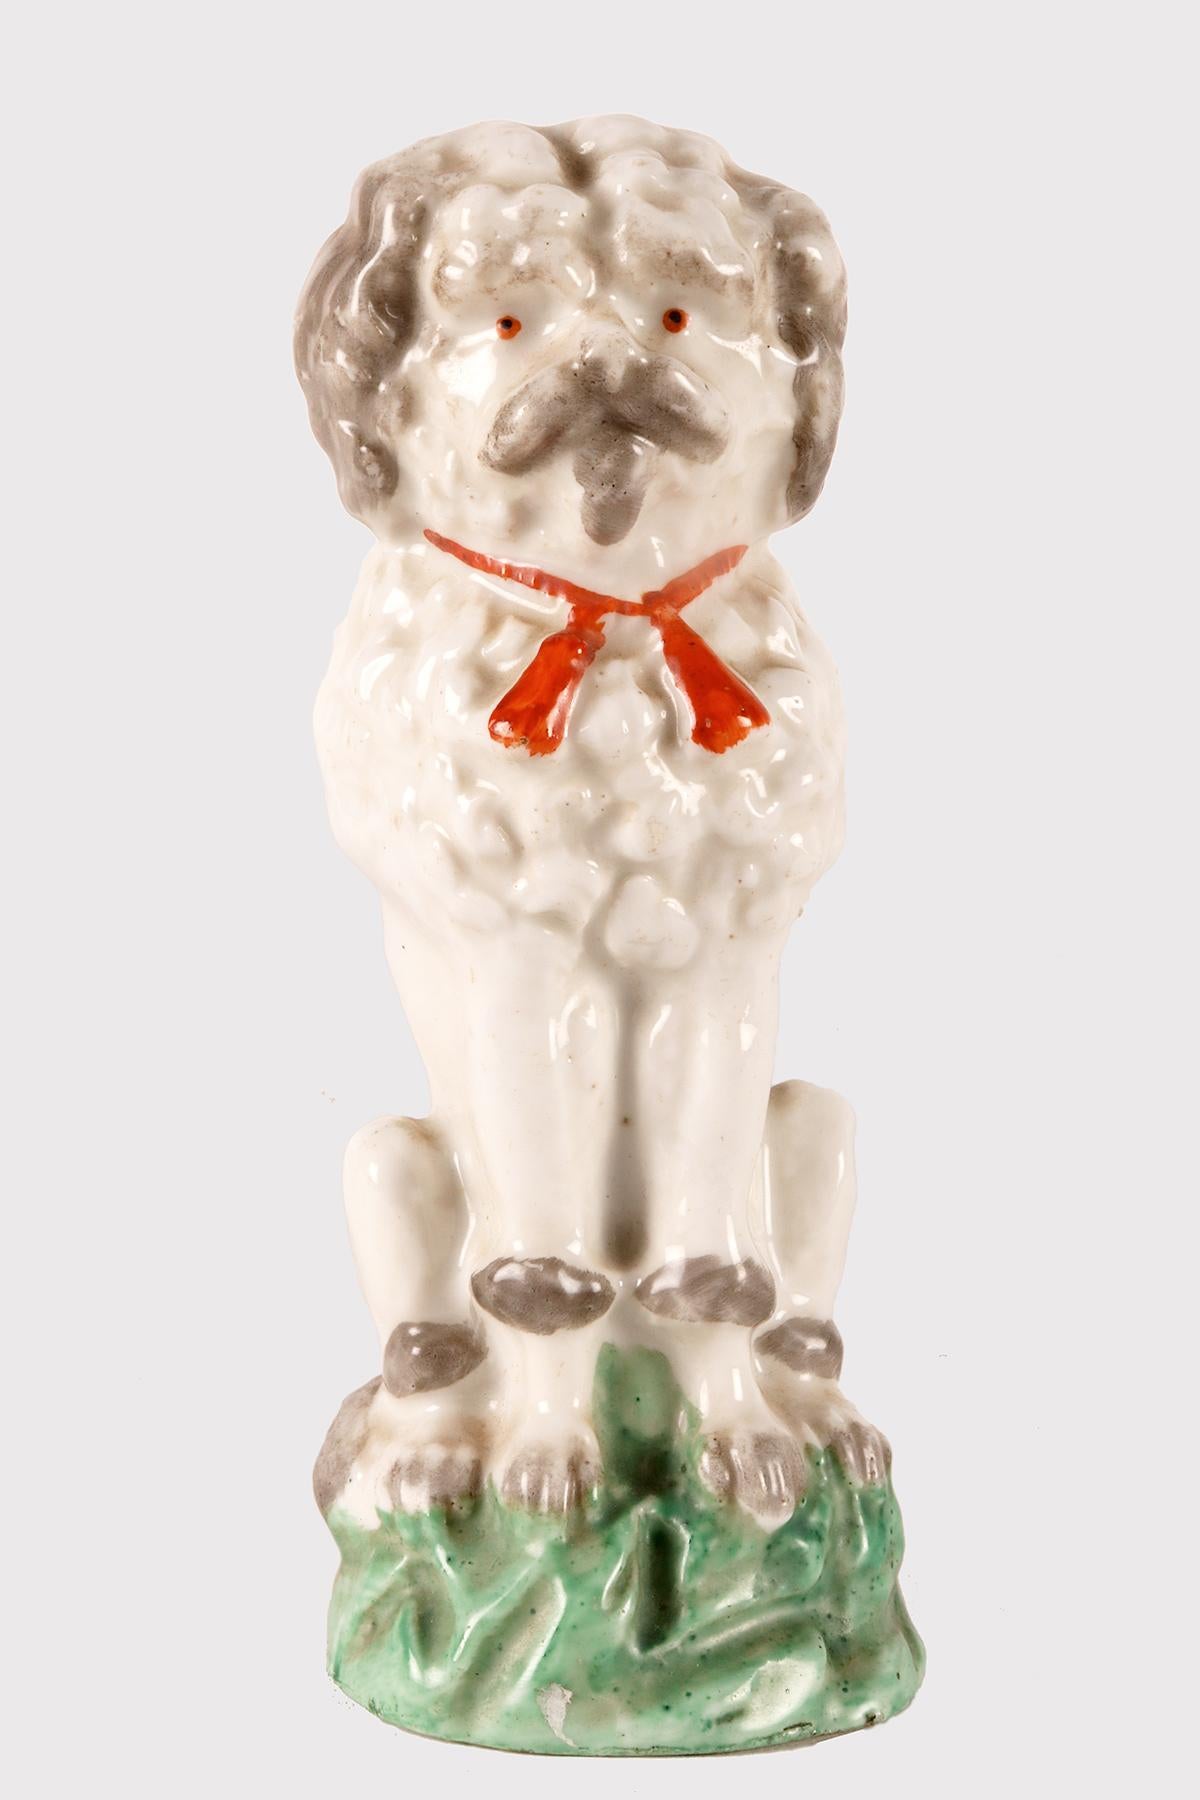 Painted porcelain sculpture depicting a Poodle dog sitting on the grass, with a red ribbon around its neck. England circa 1900.